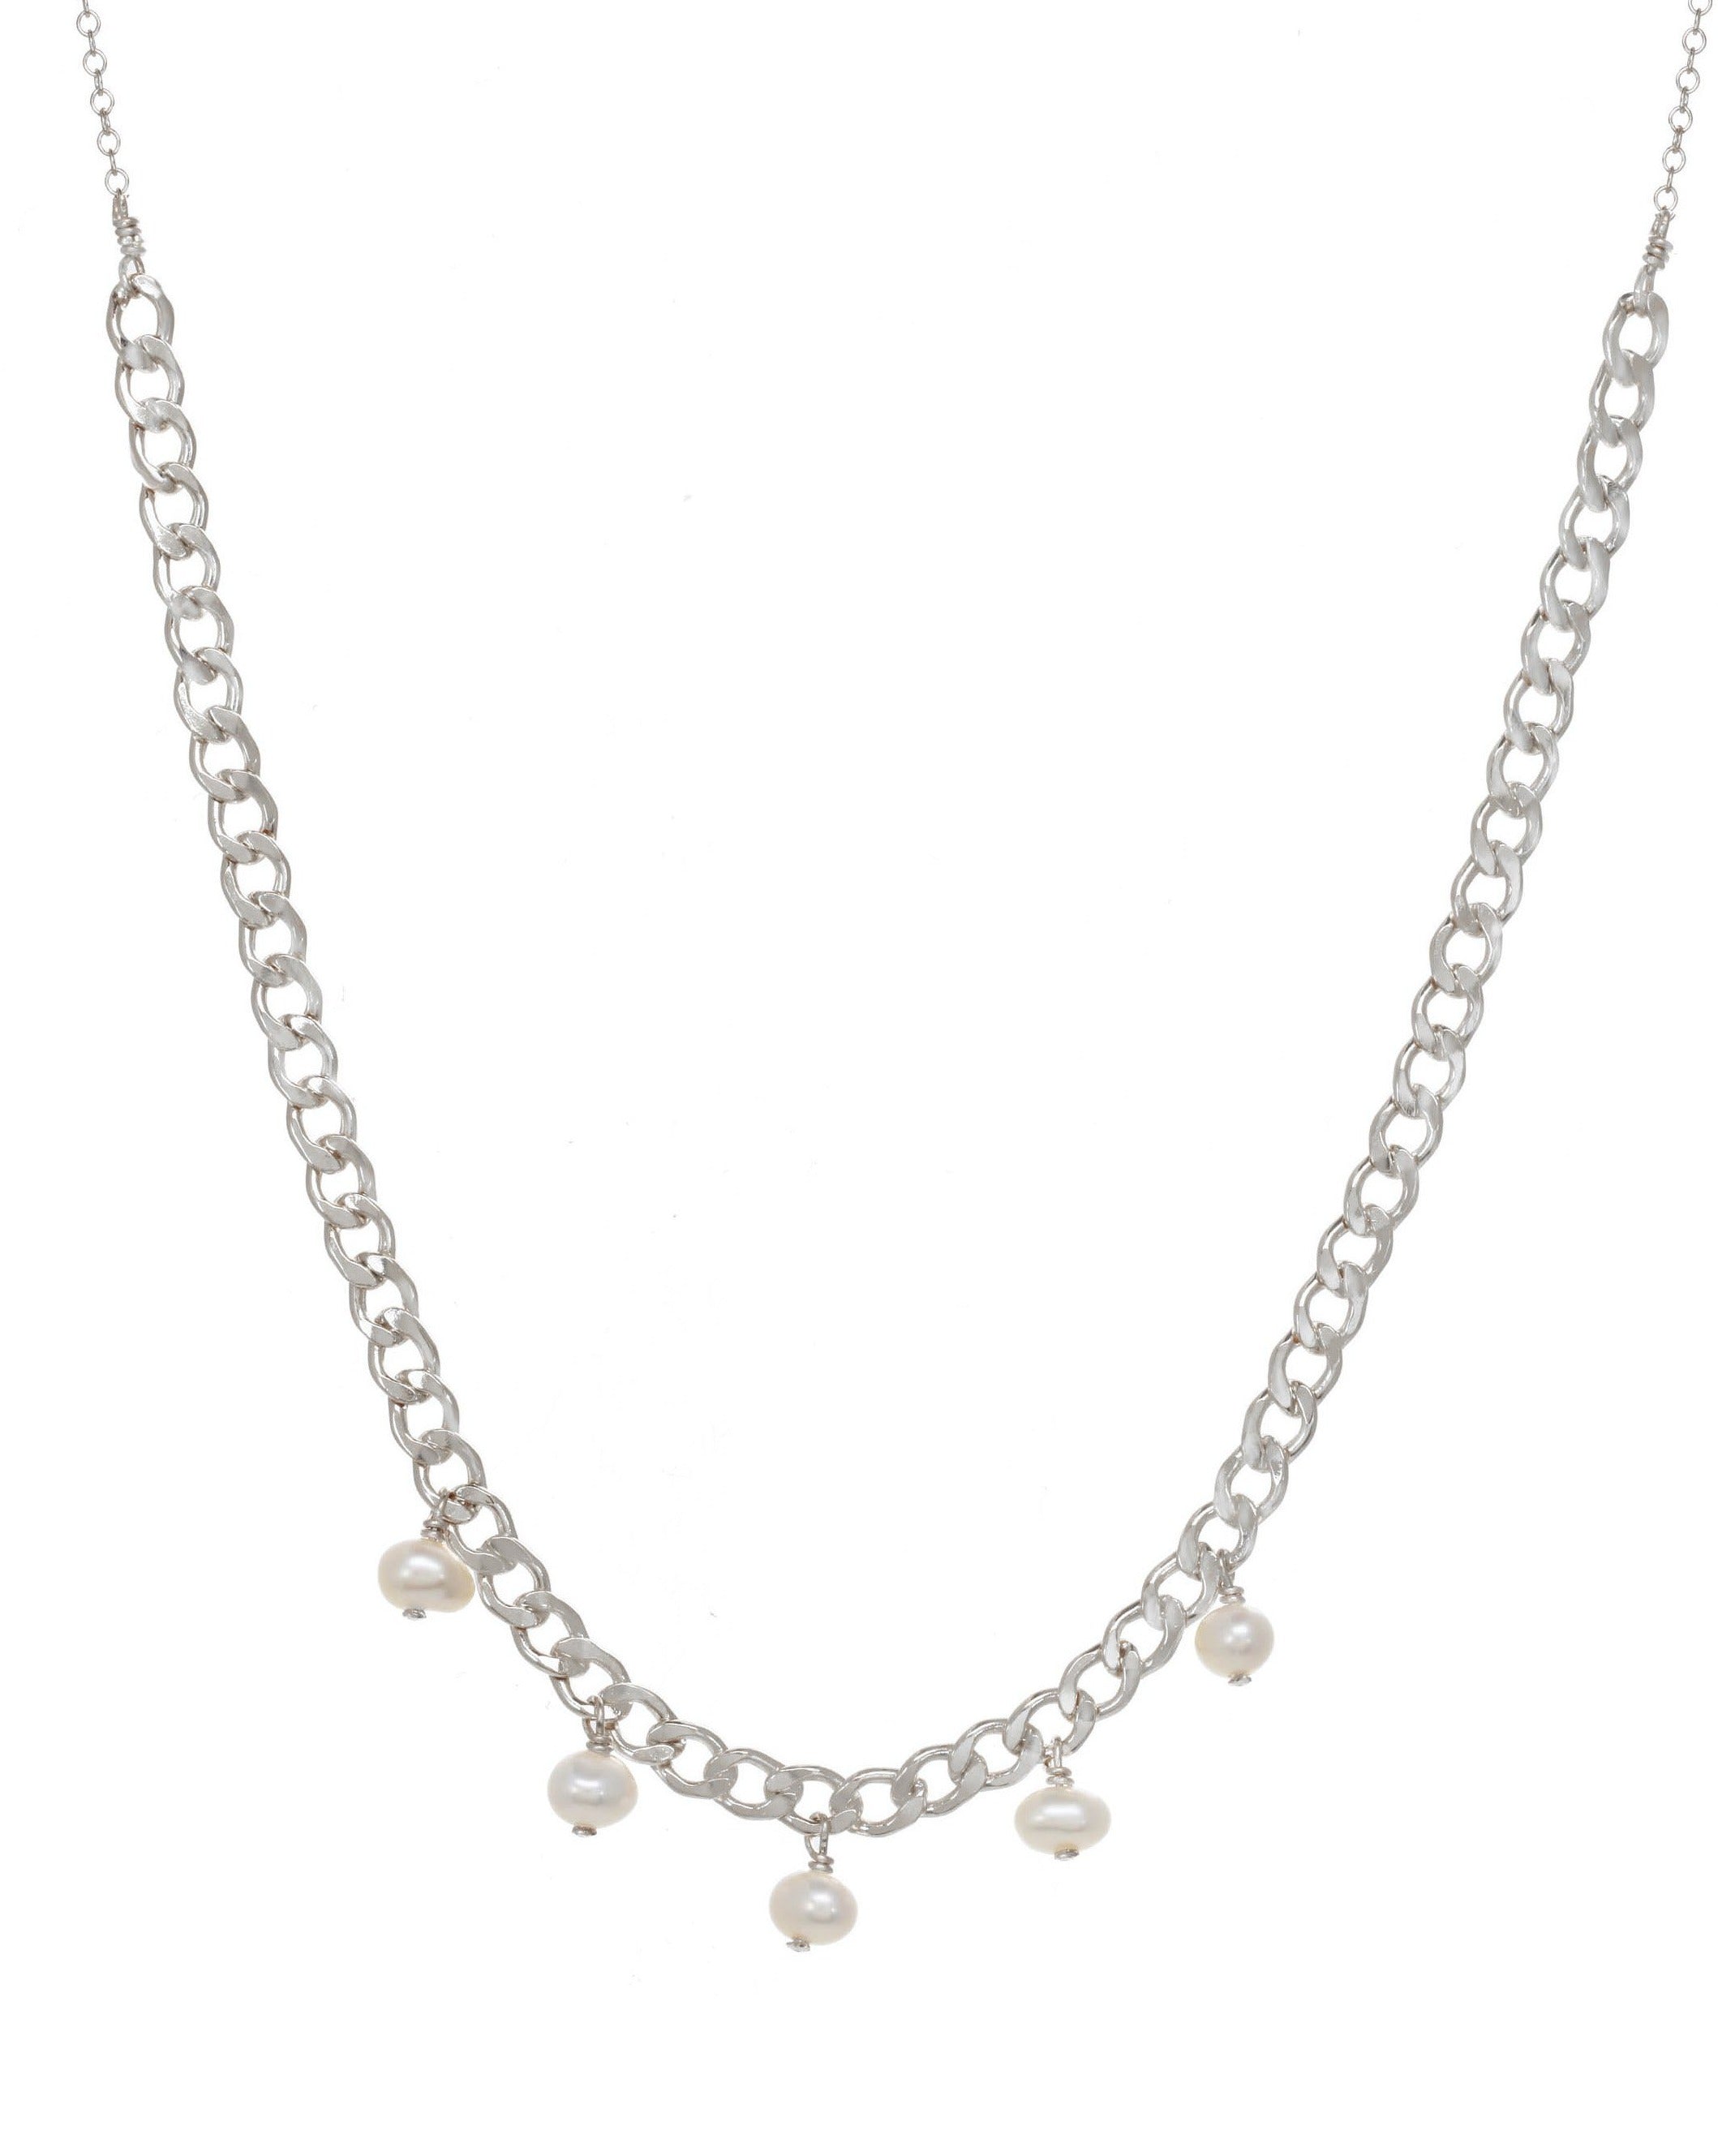 Sofia Necklace by KOZAKH. A 16 to 18 inch adjustable length necklace, crafted in Sterling Silver, featuring a lower half of 5mm Flat curb chain and 4mm white pearls.